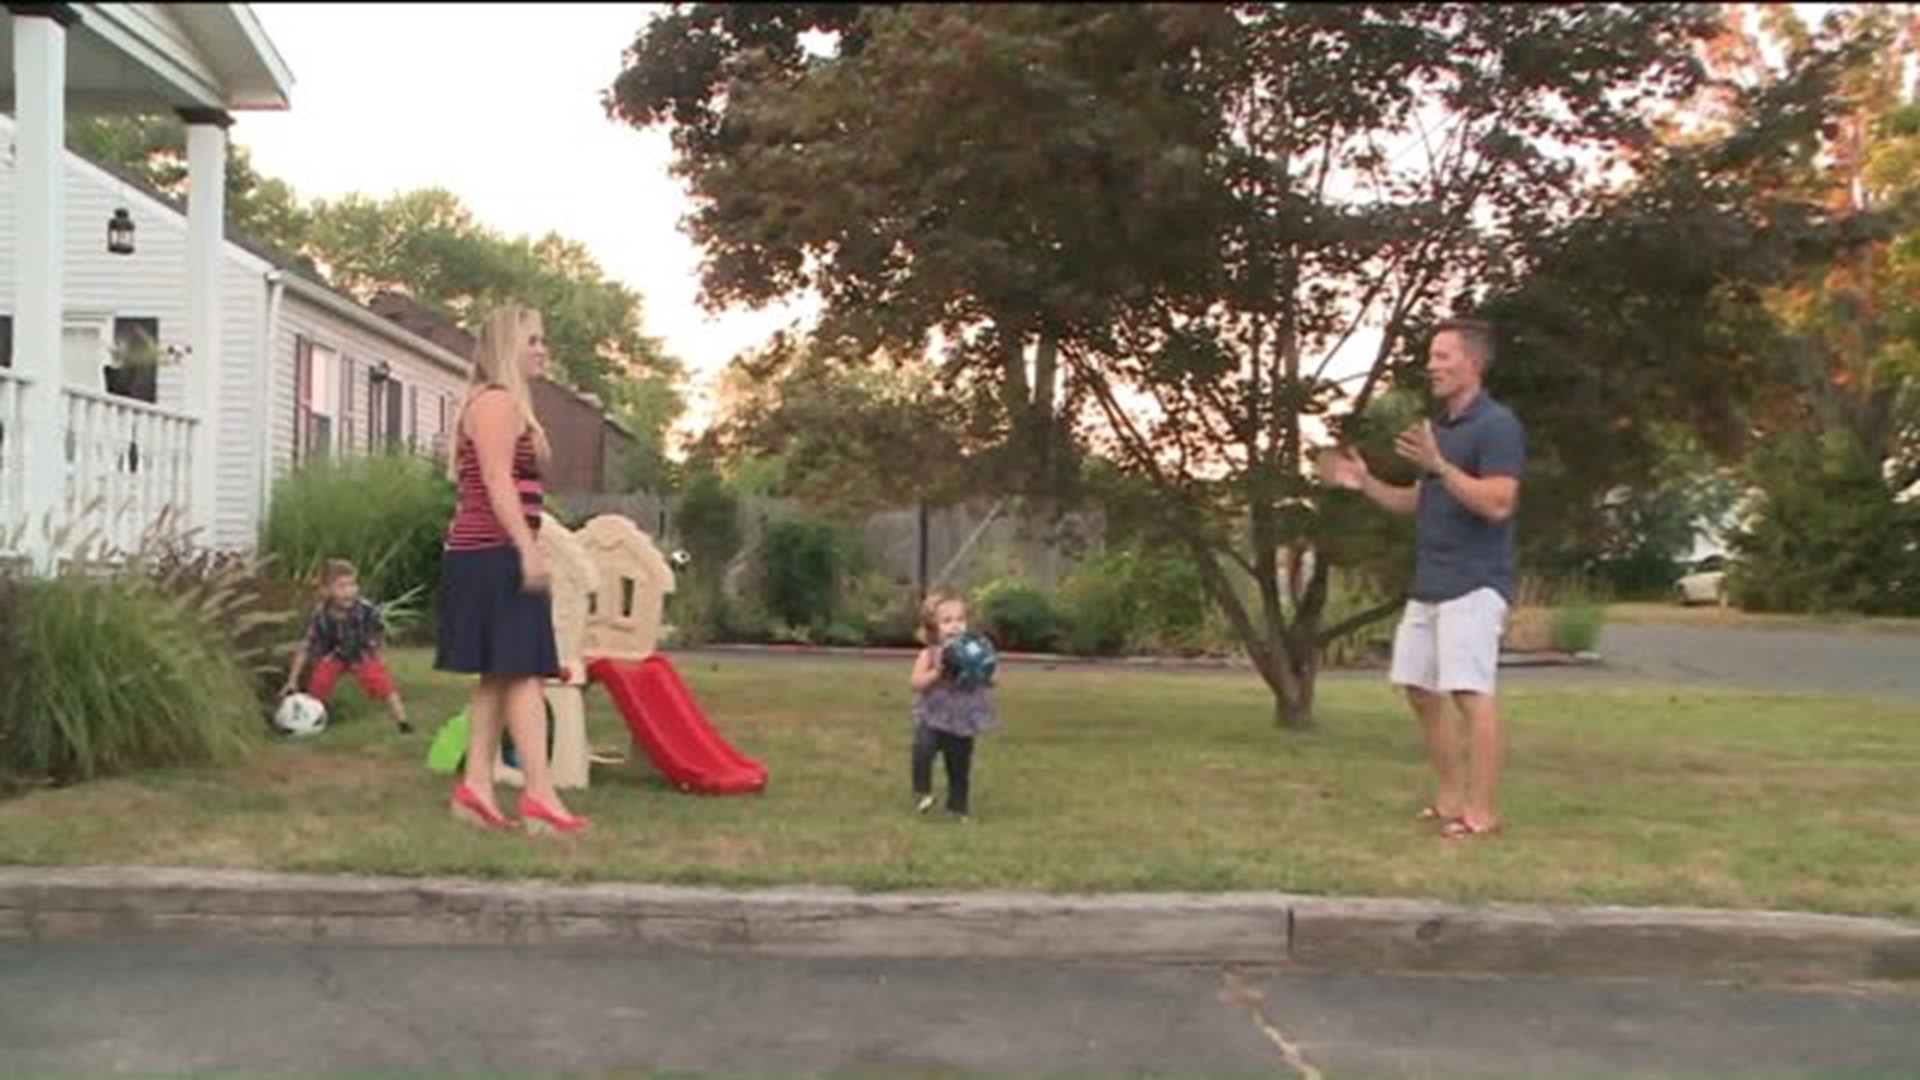 A local family gives away their home